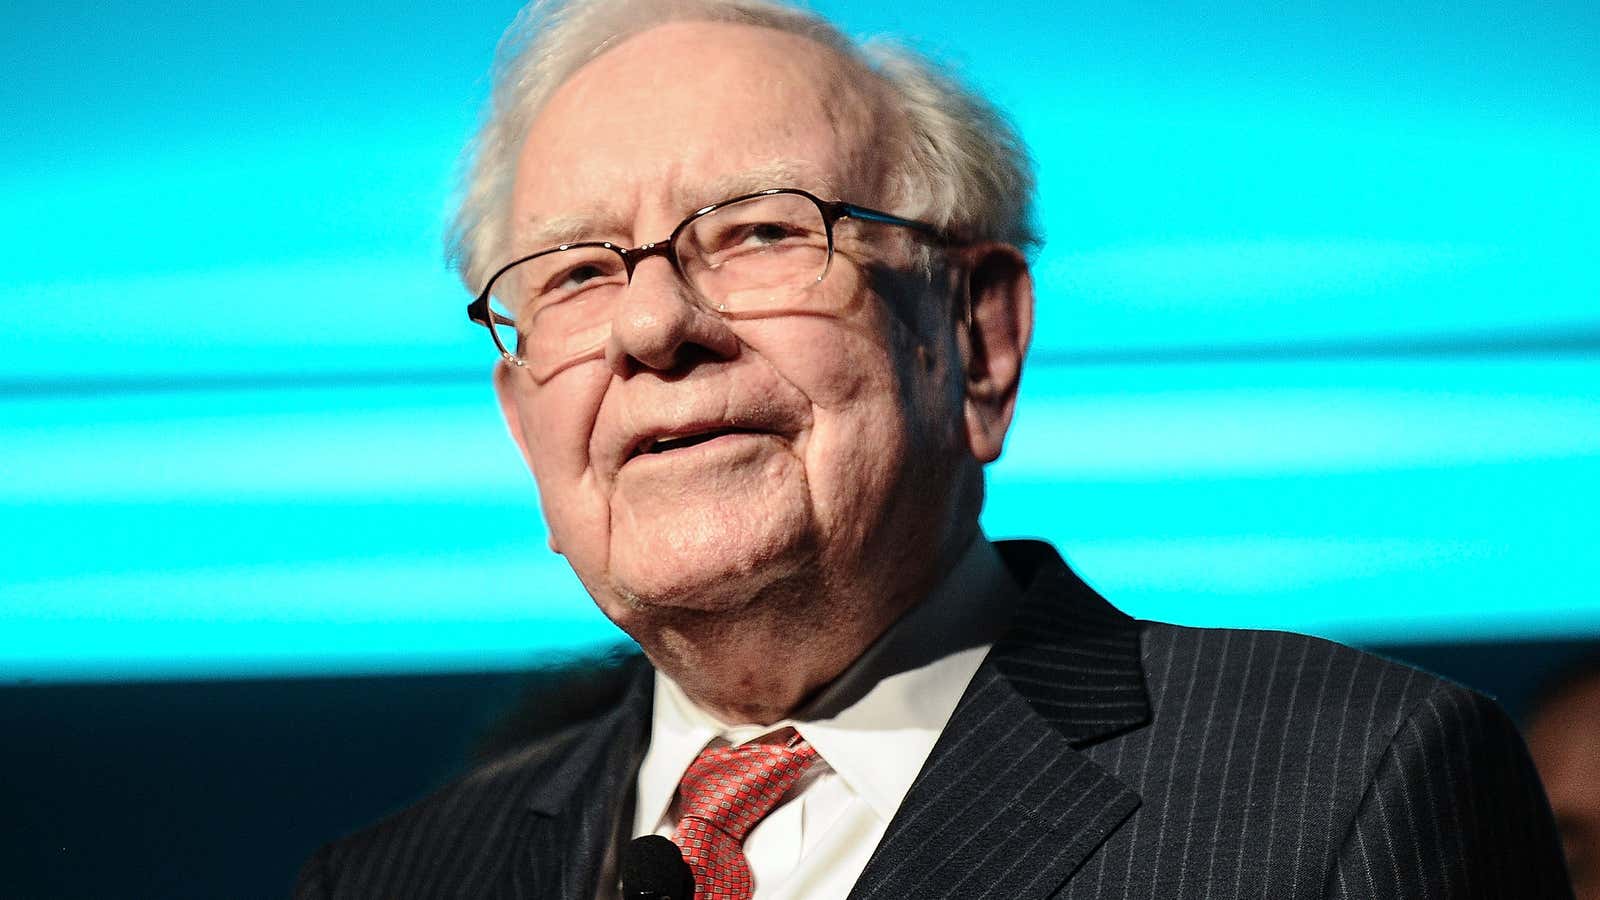 Image for Warren Buffett's Berkshire Hathaway annual shareholders meeting is coming soon. 3 things to watch